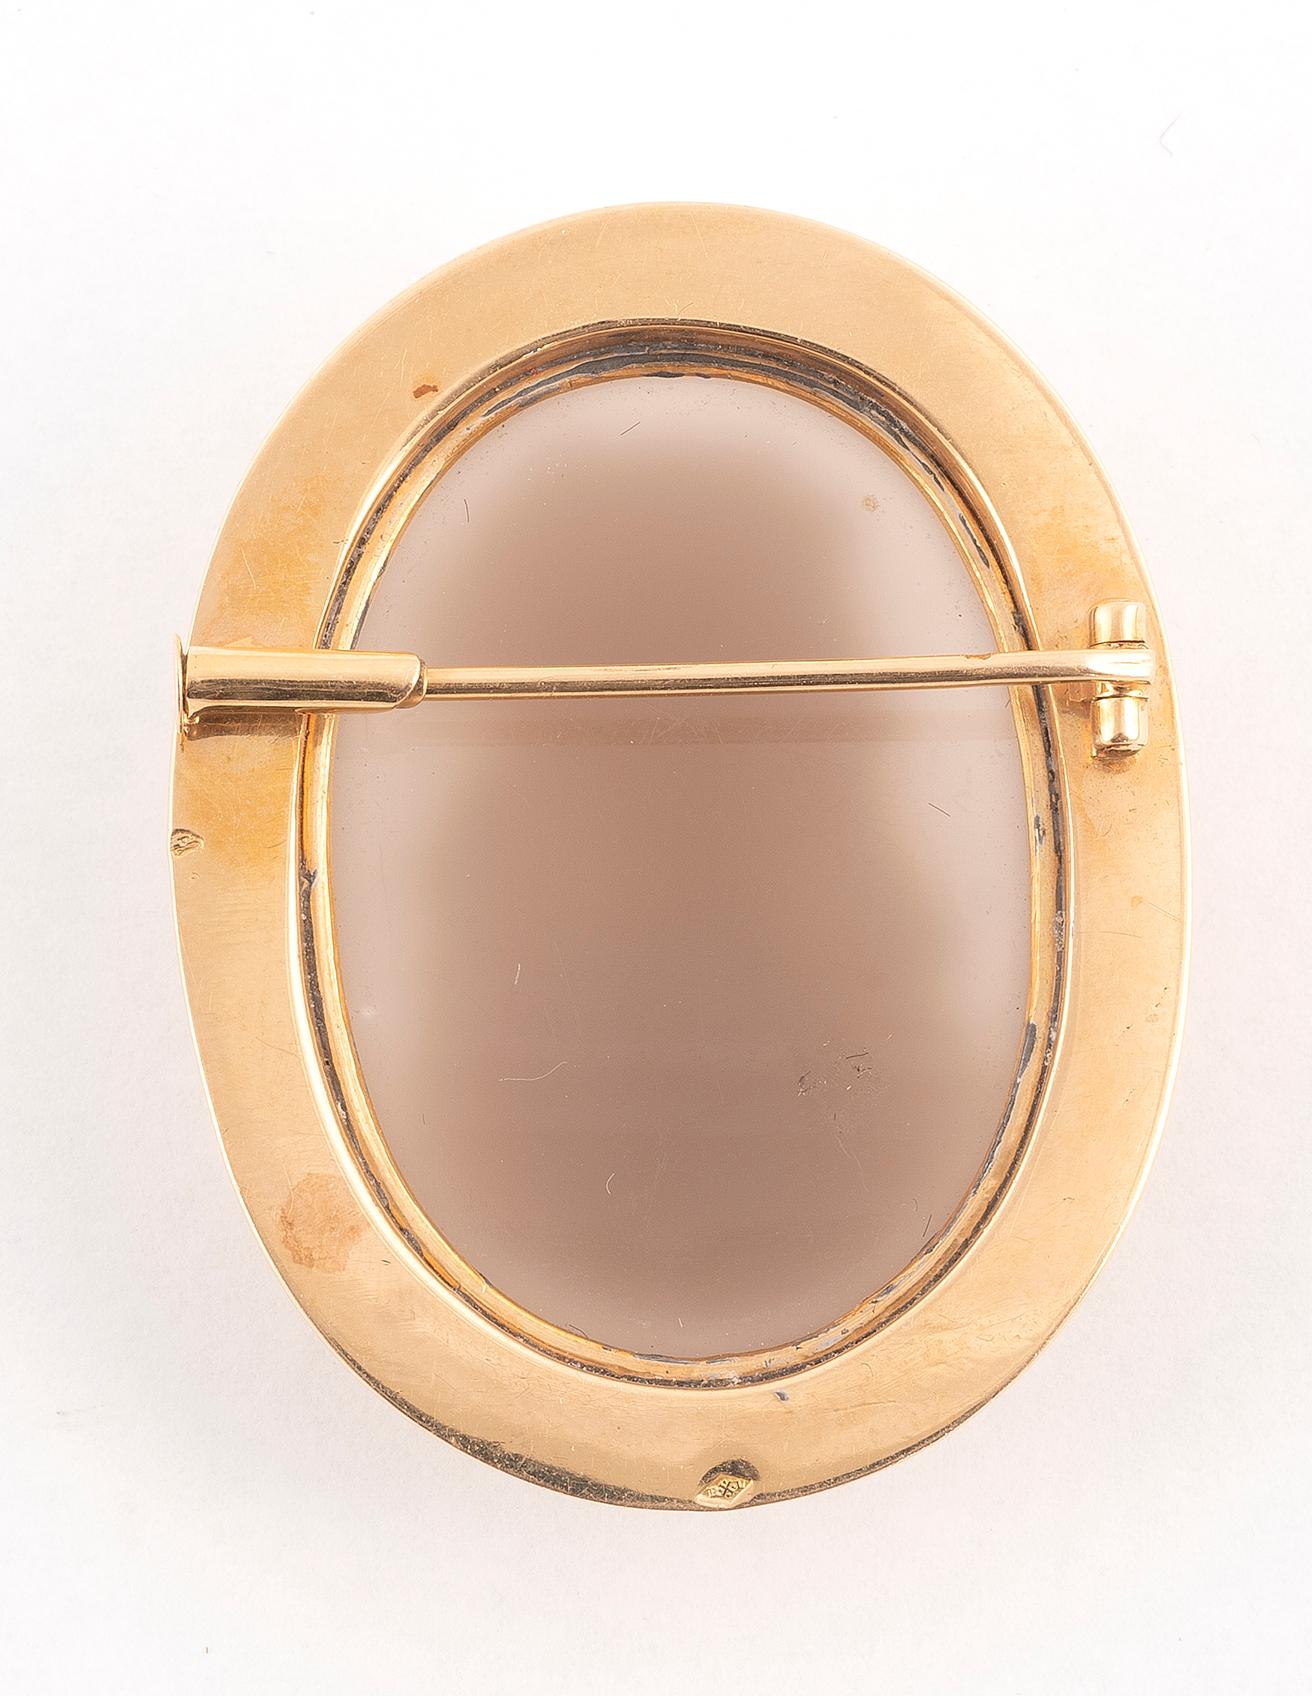 

Yellow gold brooch, adorned with a cameo on agate depicting the profile of a richly dressed woman. 
Dimensions: 4.2 x 3.1 cm. 
Weight: 23.2g. 